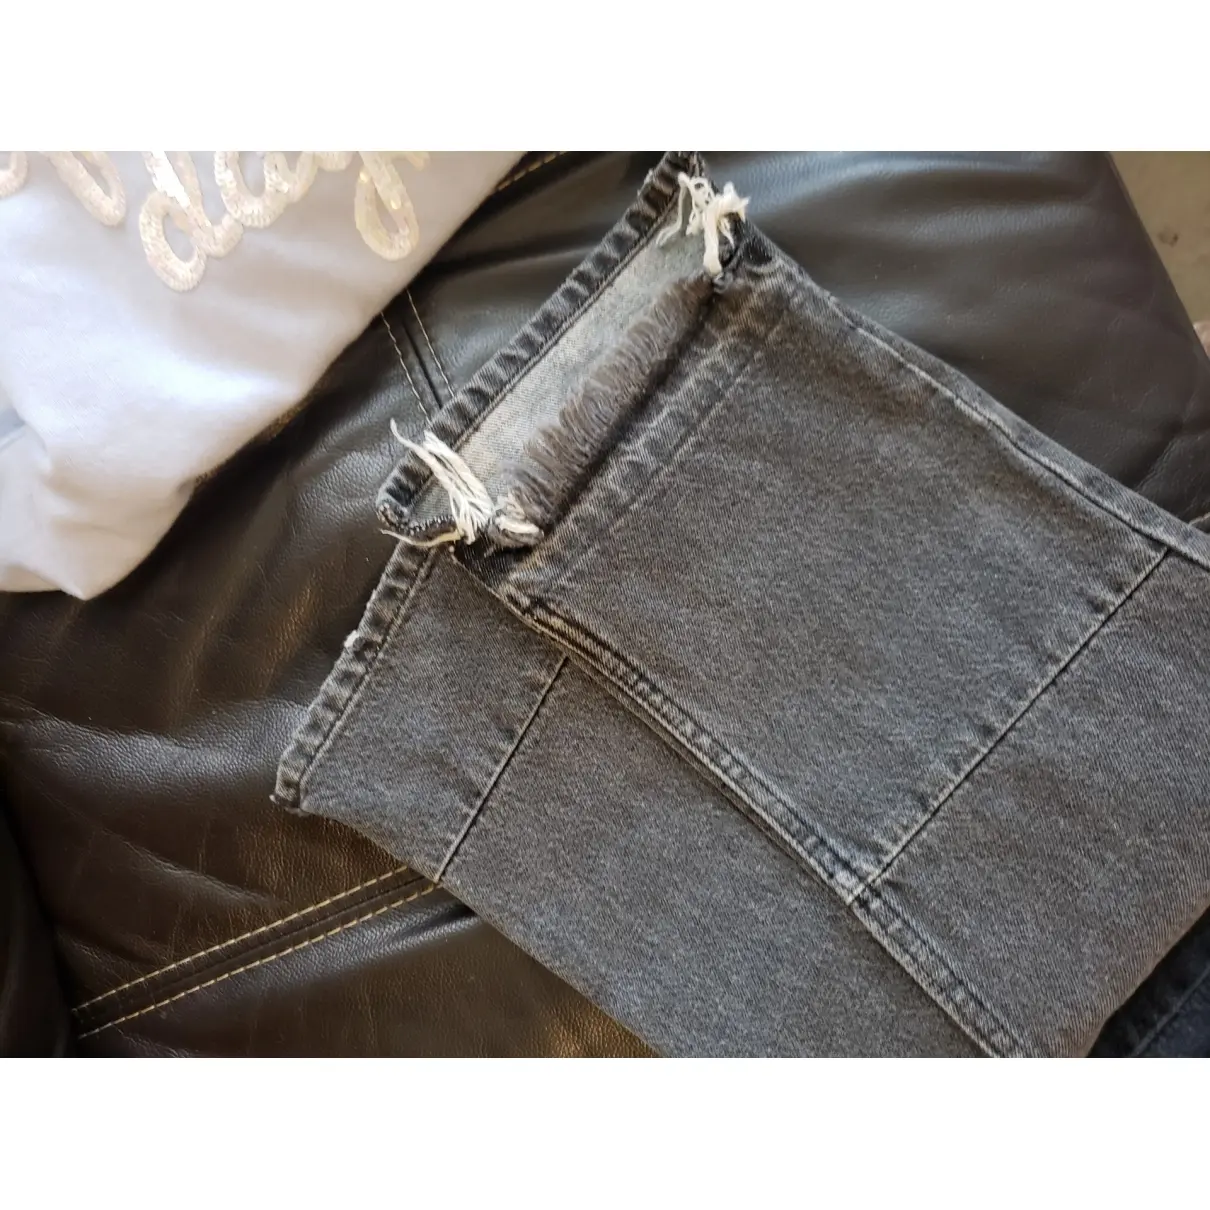 Grey Cotton - elasthane Jeans Fall Winter 2019 The Kooples